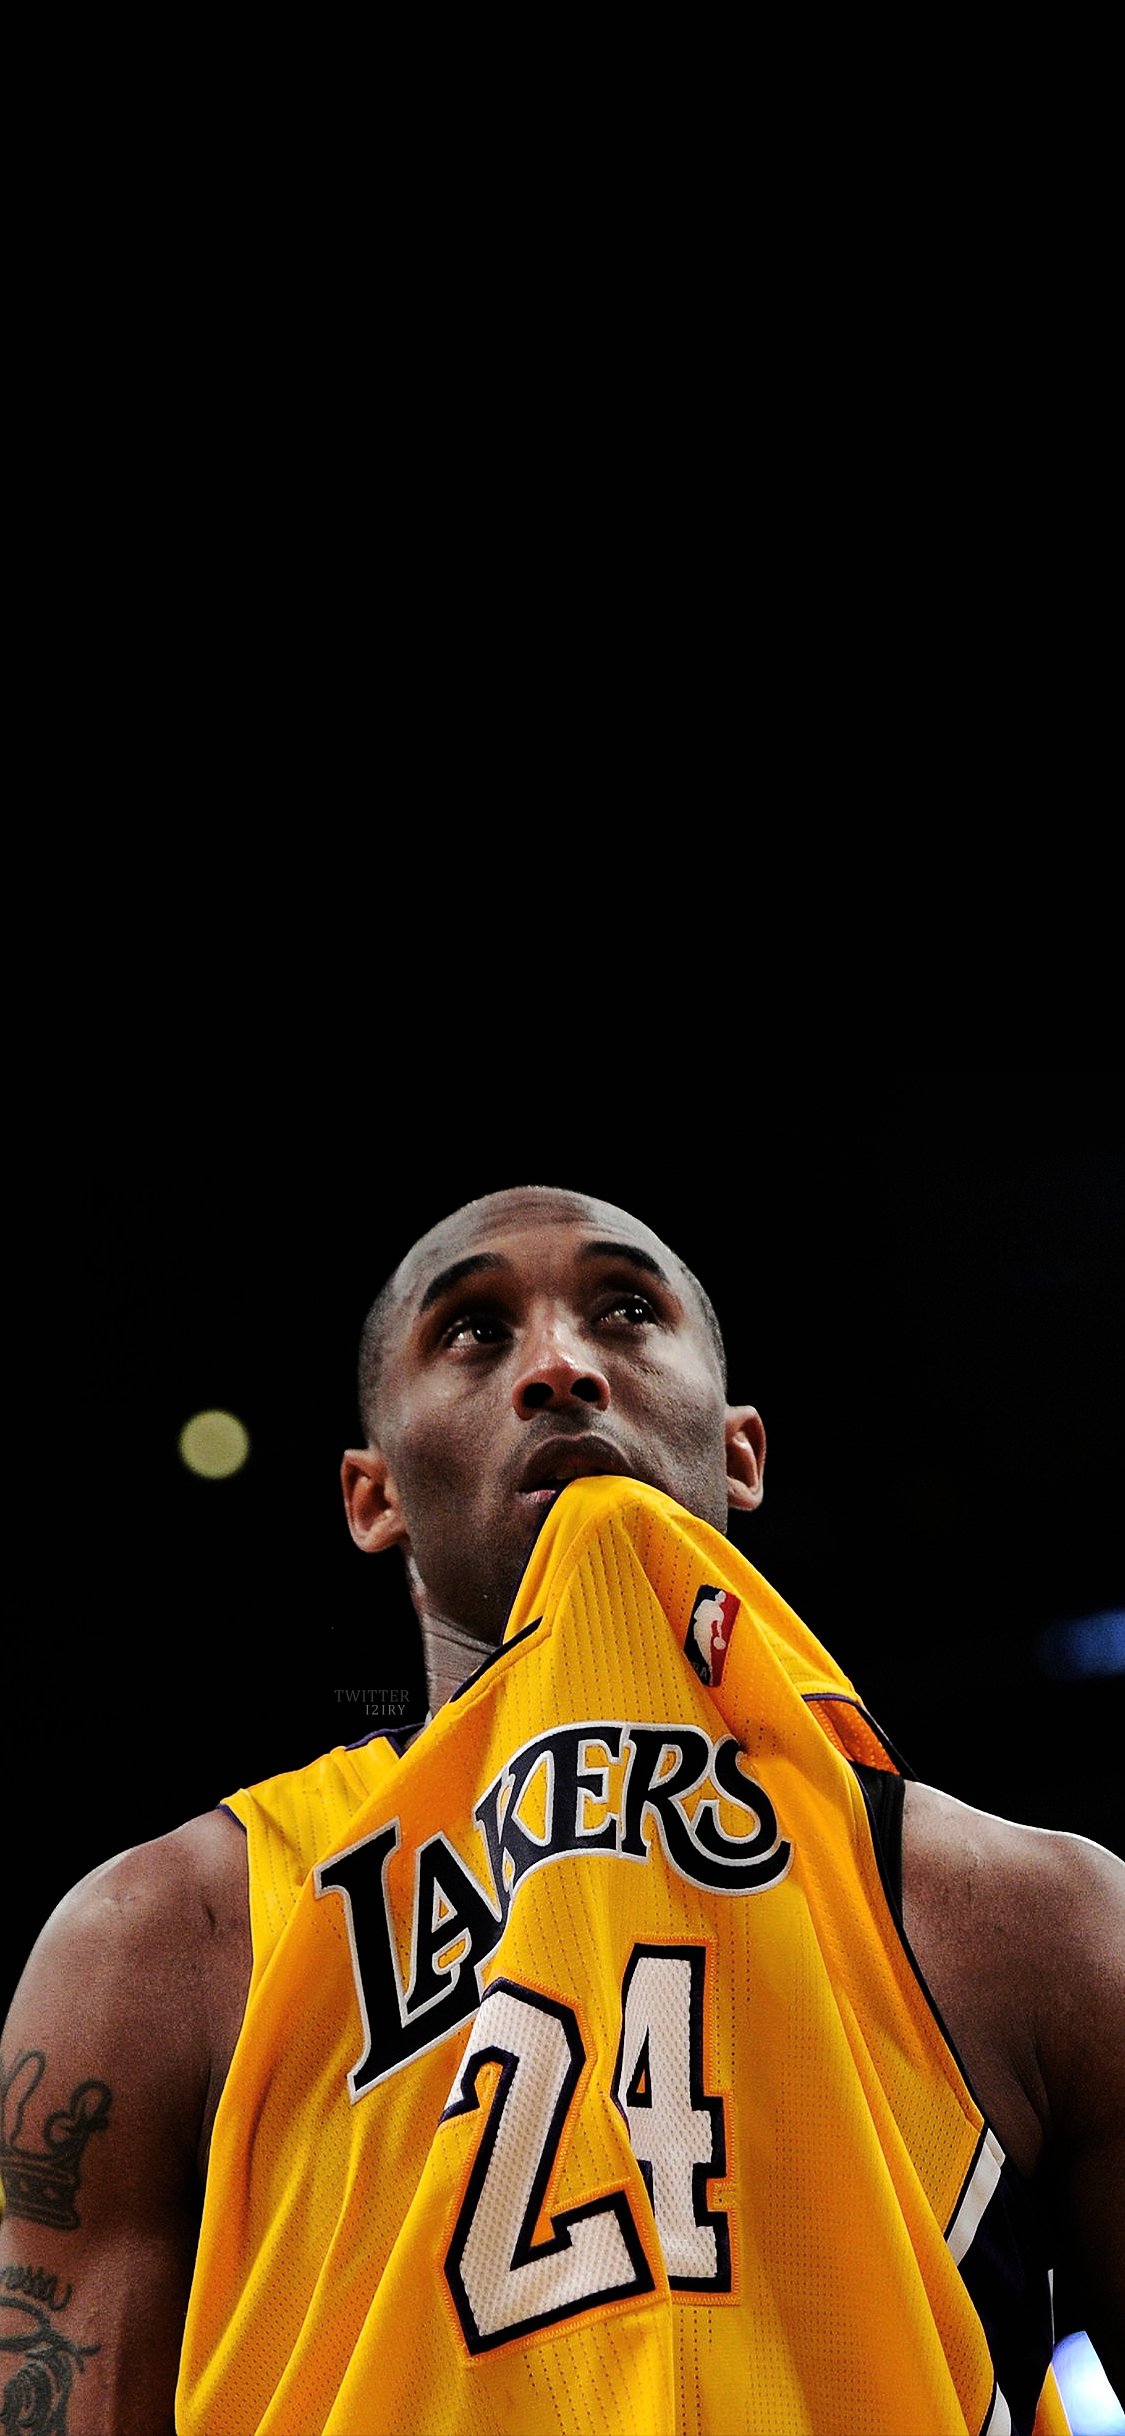 Download Kobe Bryant Wallpapers HD 4K Free for Android  Kobe Bryant  Wallpapers HD 4K APK Download  STEPrimocom